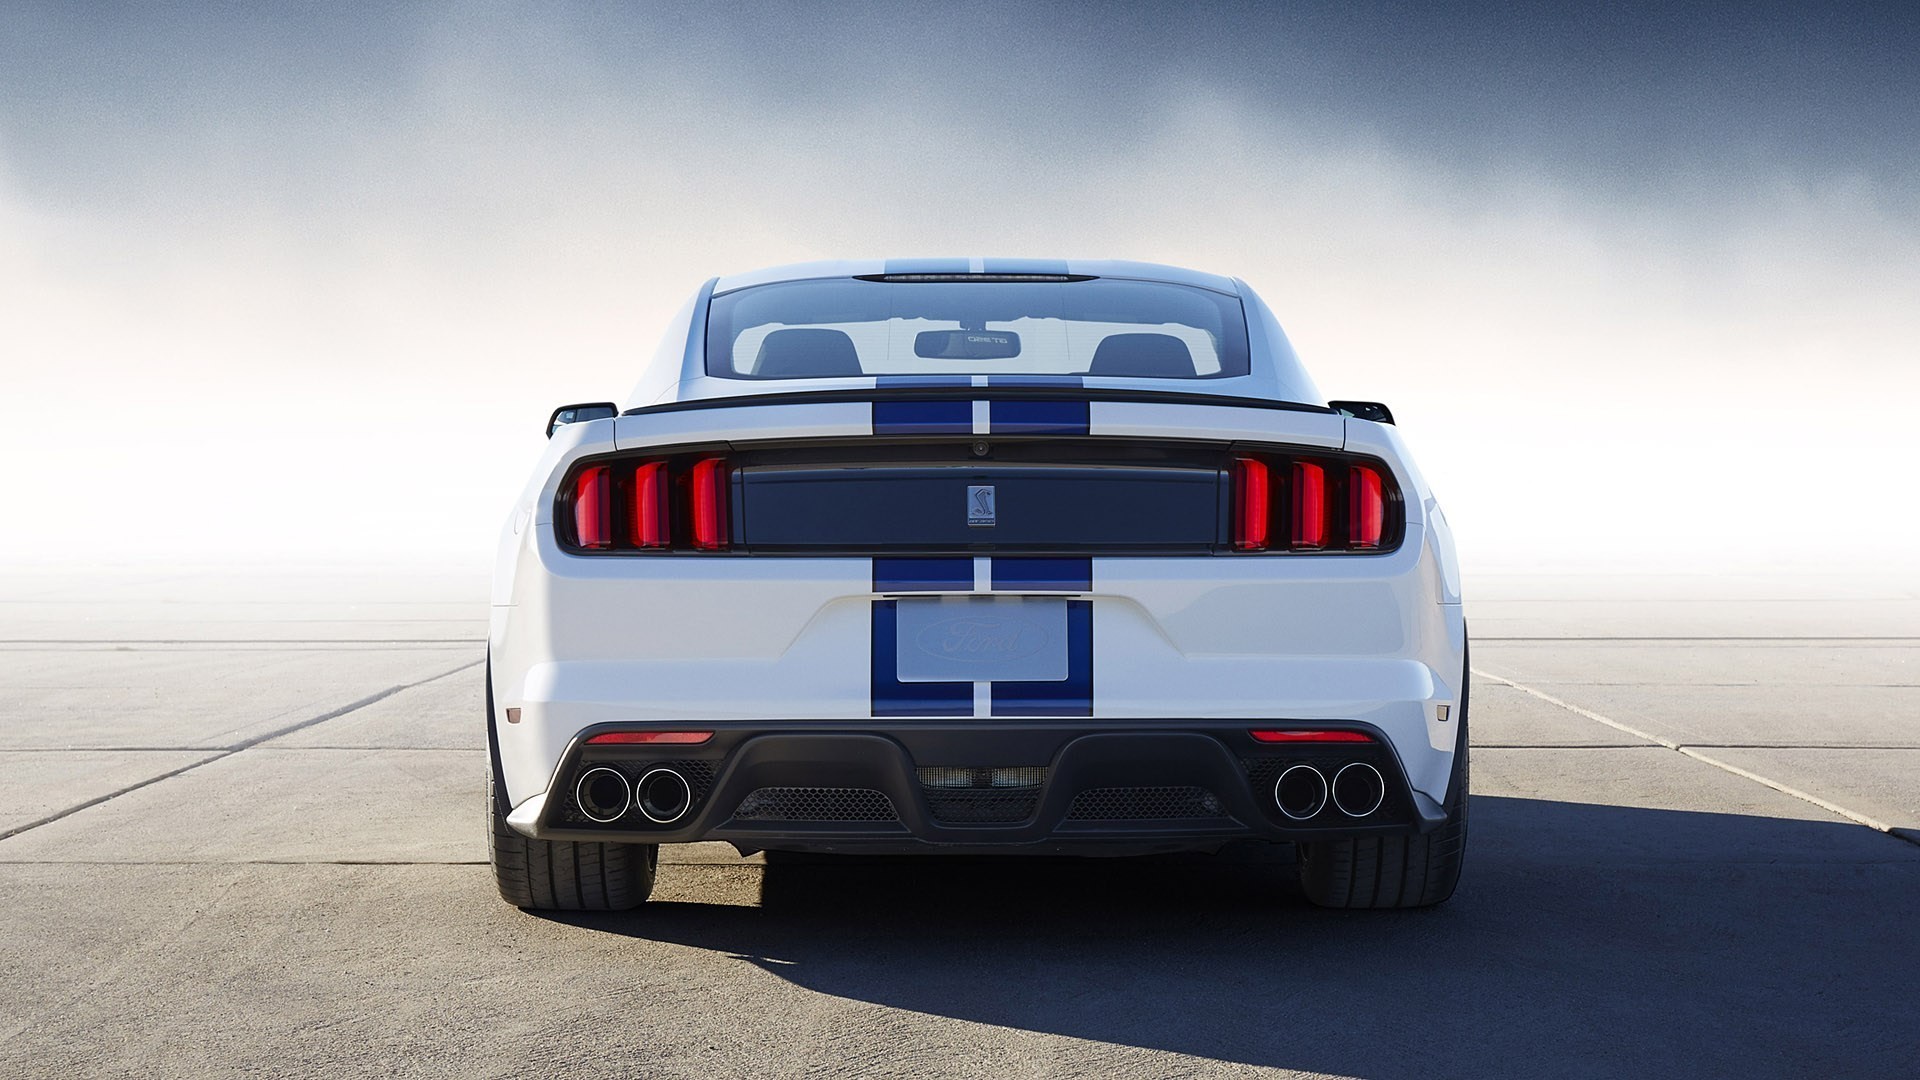 1920x1080 2016 ford shelby mustang gt350 wallpapers hd images wsupercars wallpaper